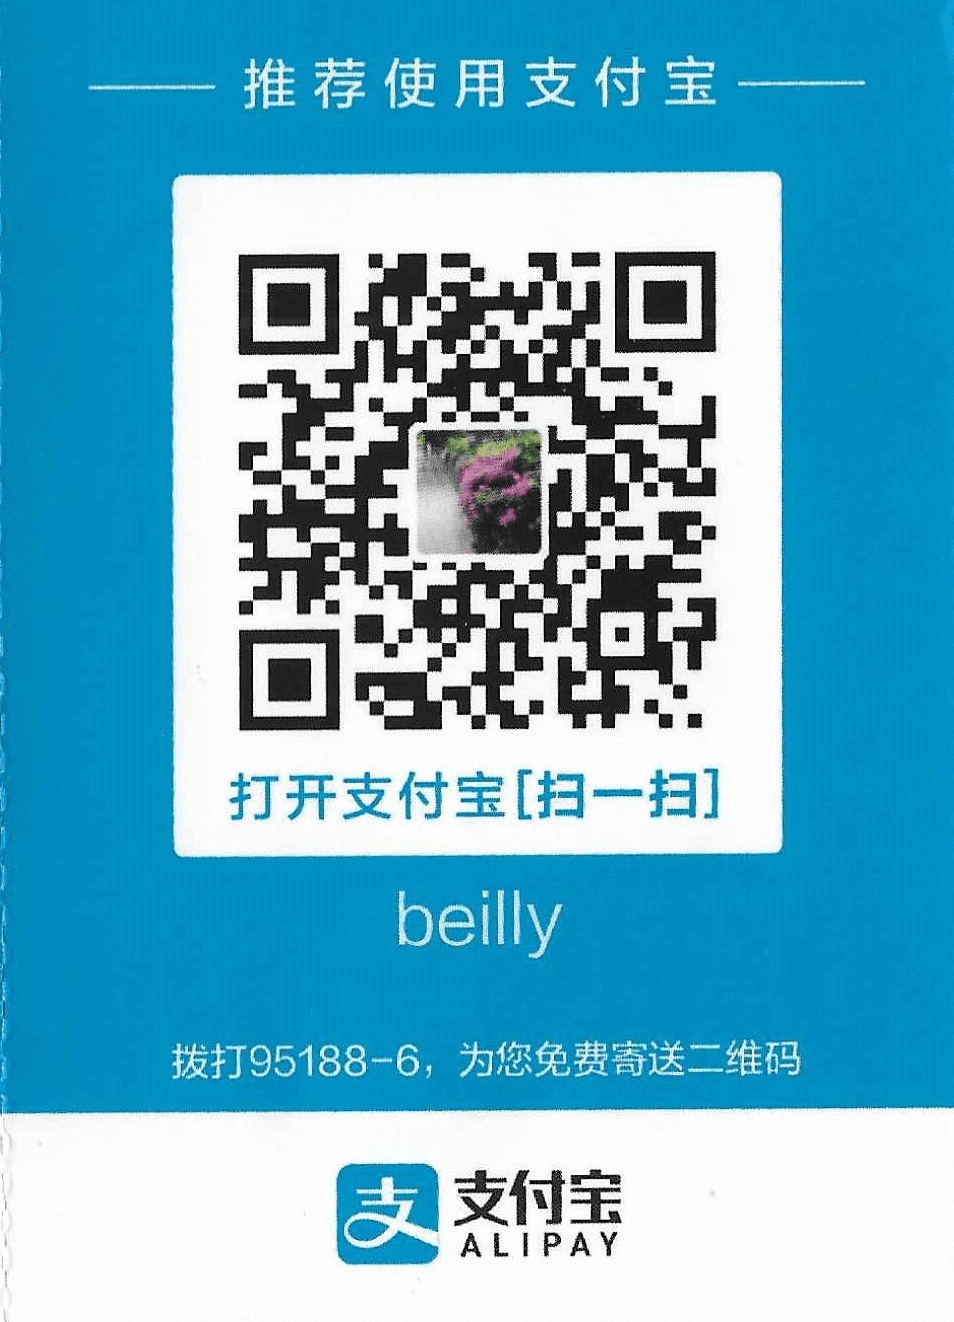 beilly Alipay